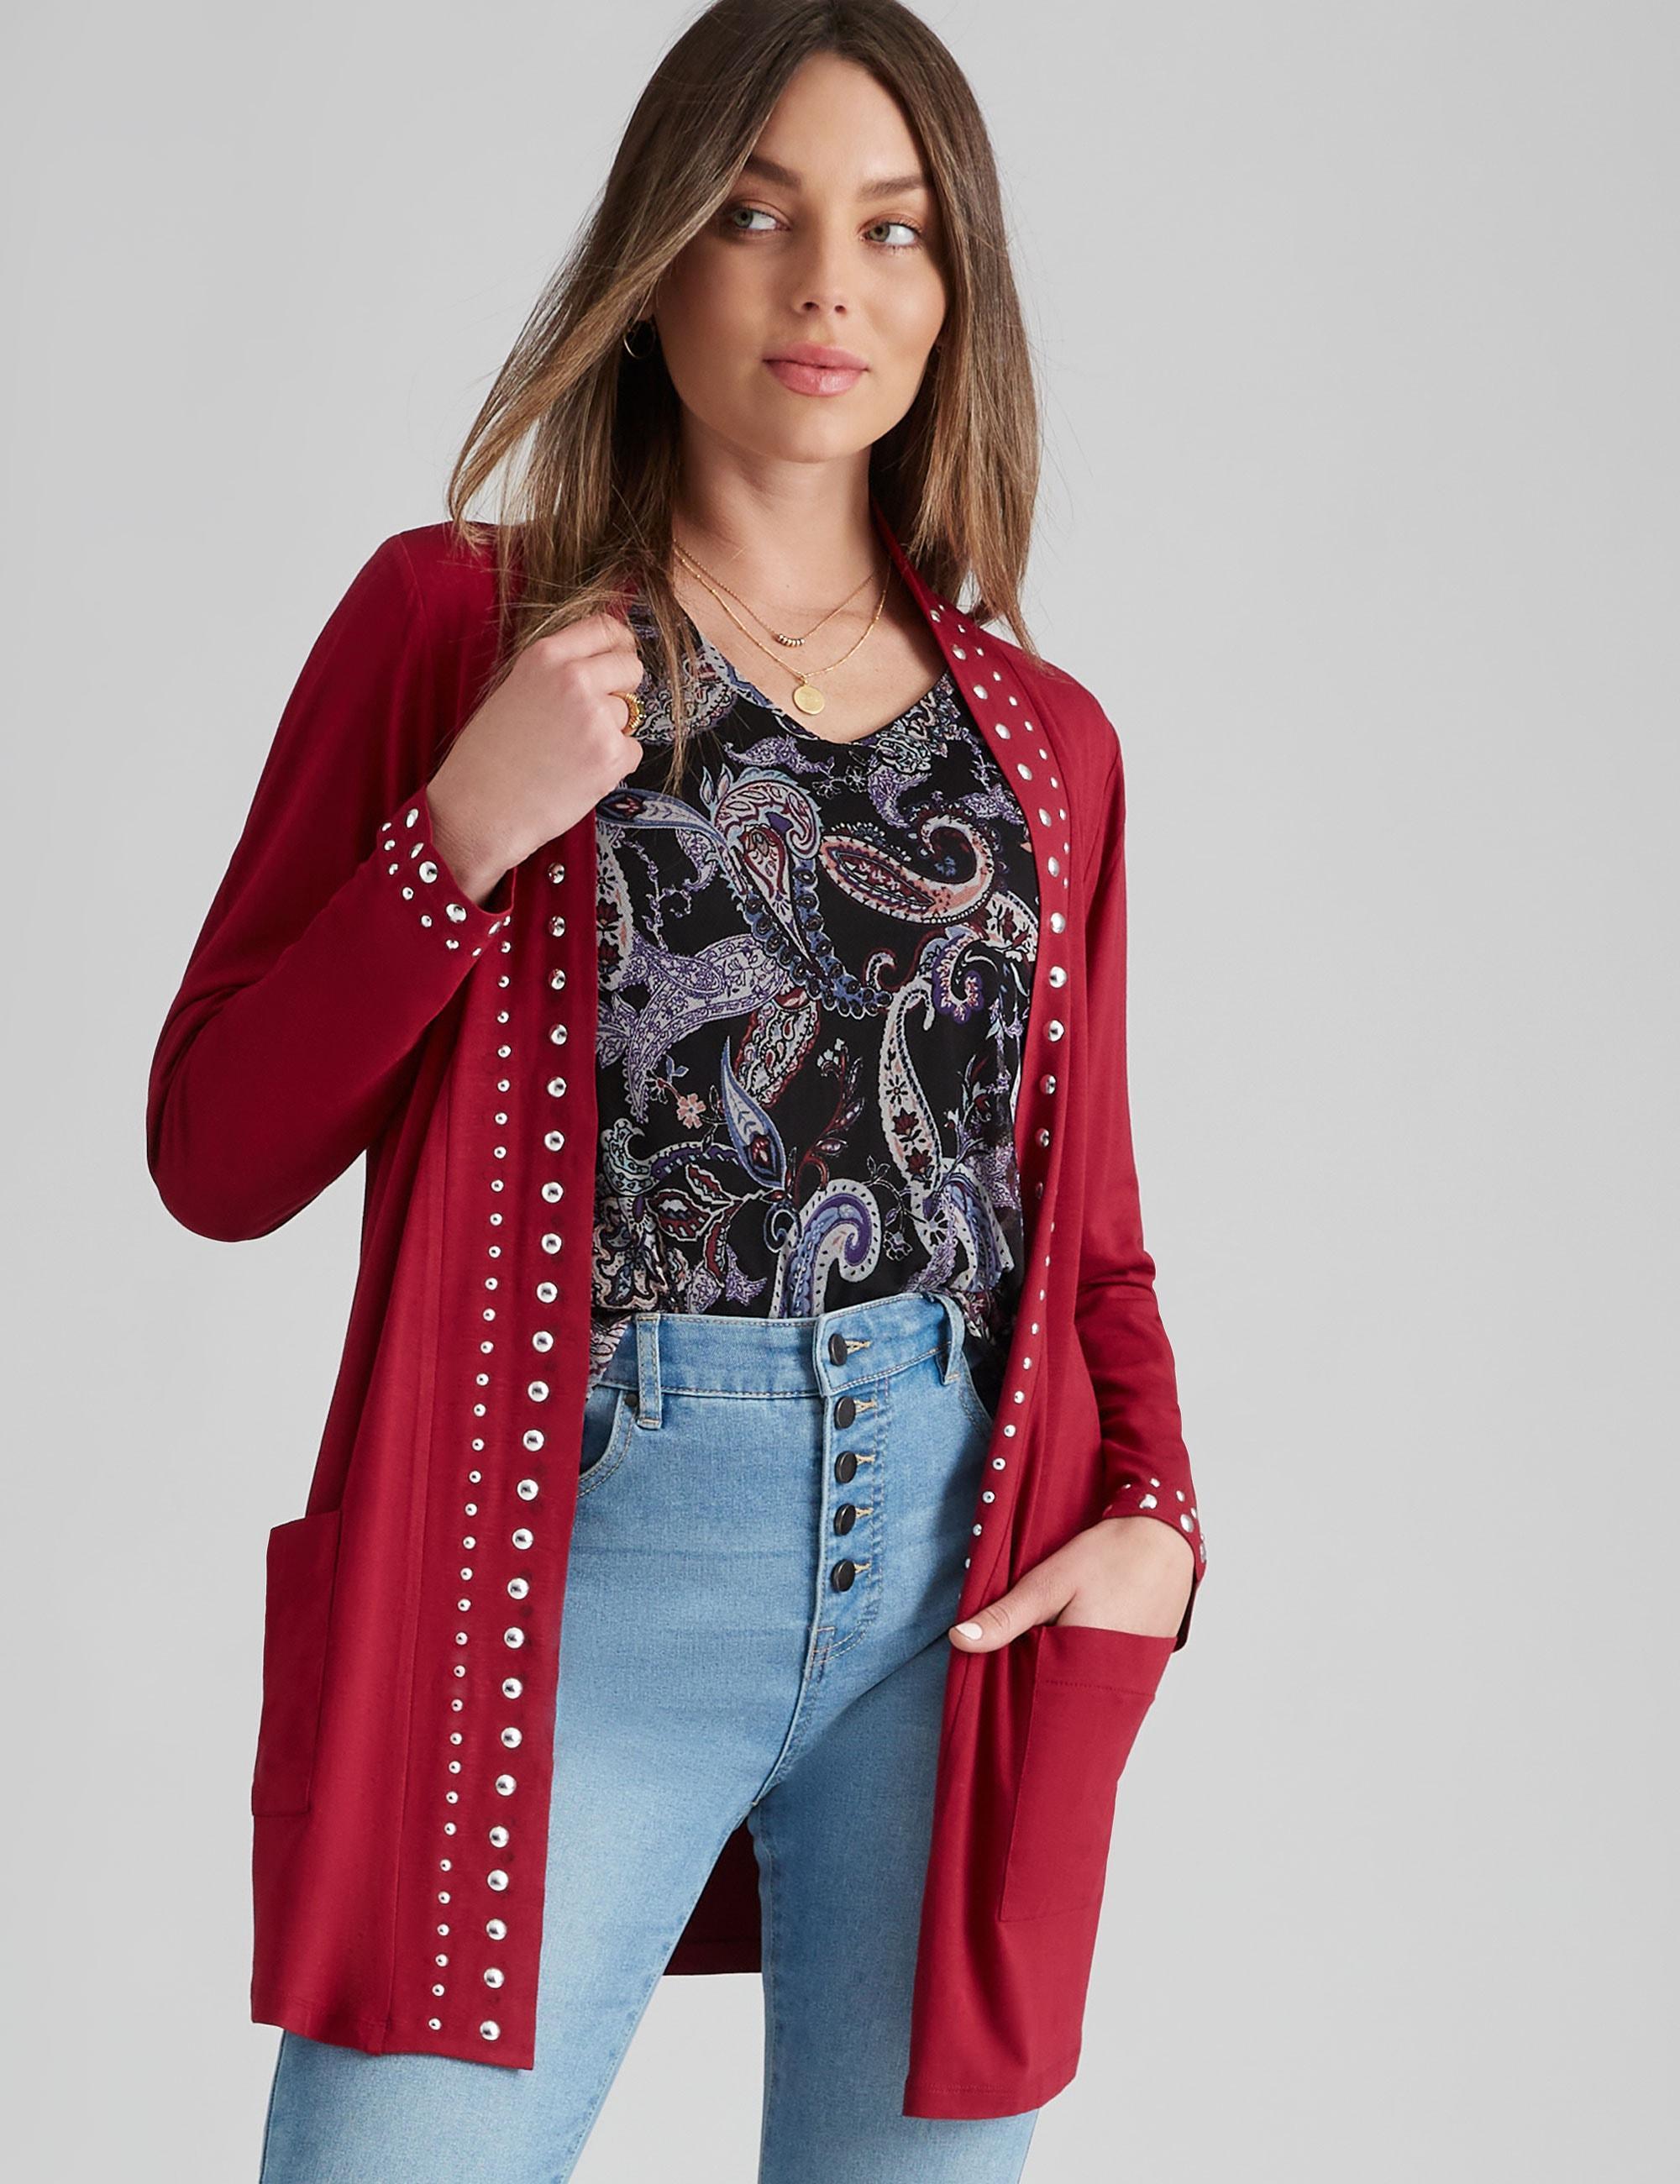 ROCKMANS - Womens Jumper - Long Summer Cardigan Cardi - Red - Sweater - Warm - Relaxed Fit - Paisley - Elastane - Long Sleeve - Nail Head Jersey